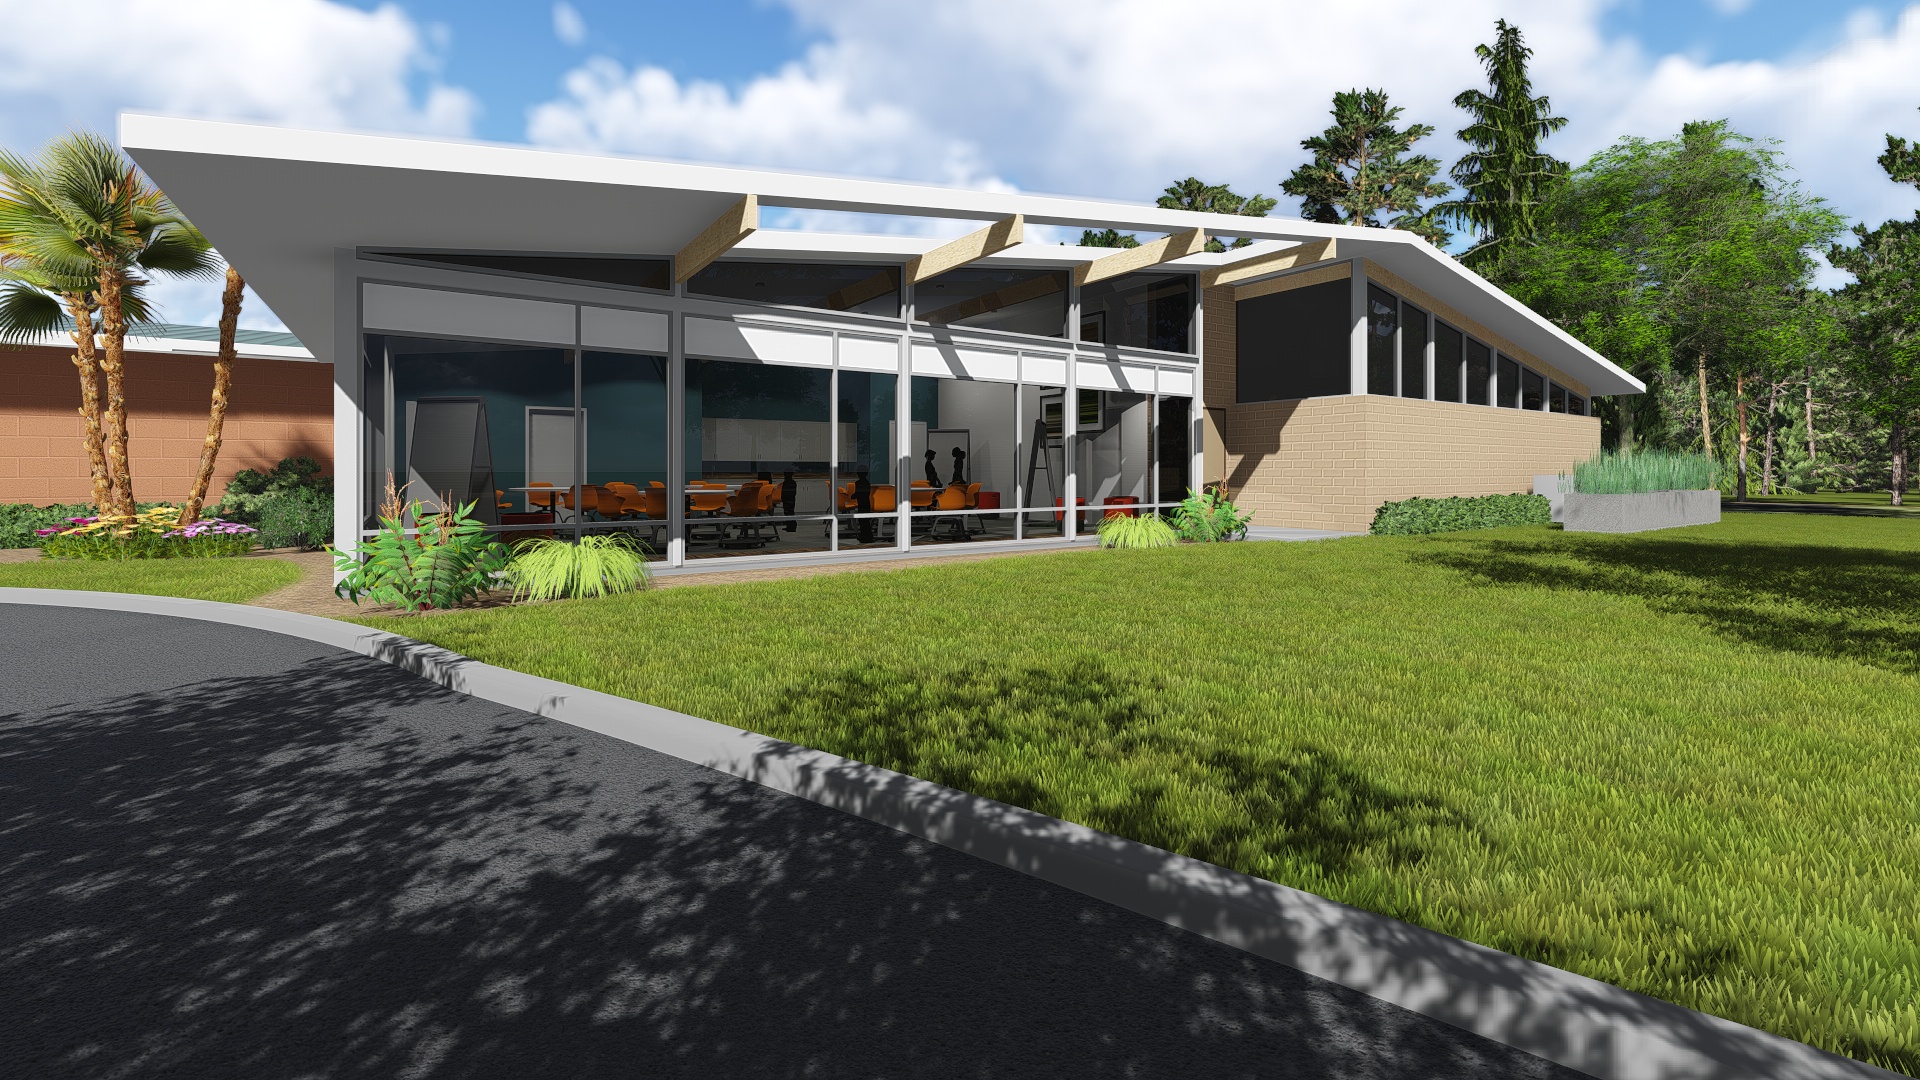 A Rendering Of Our New Media and Technology Center